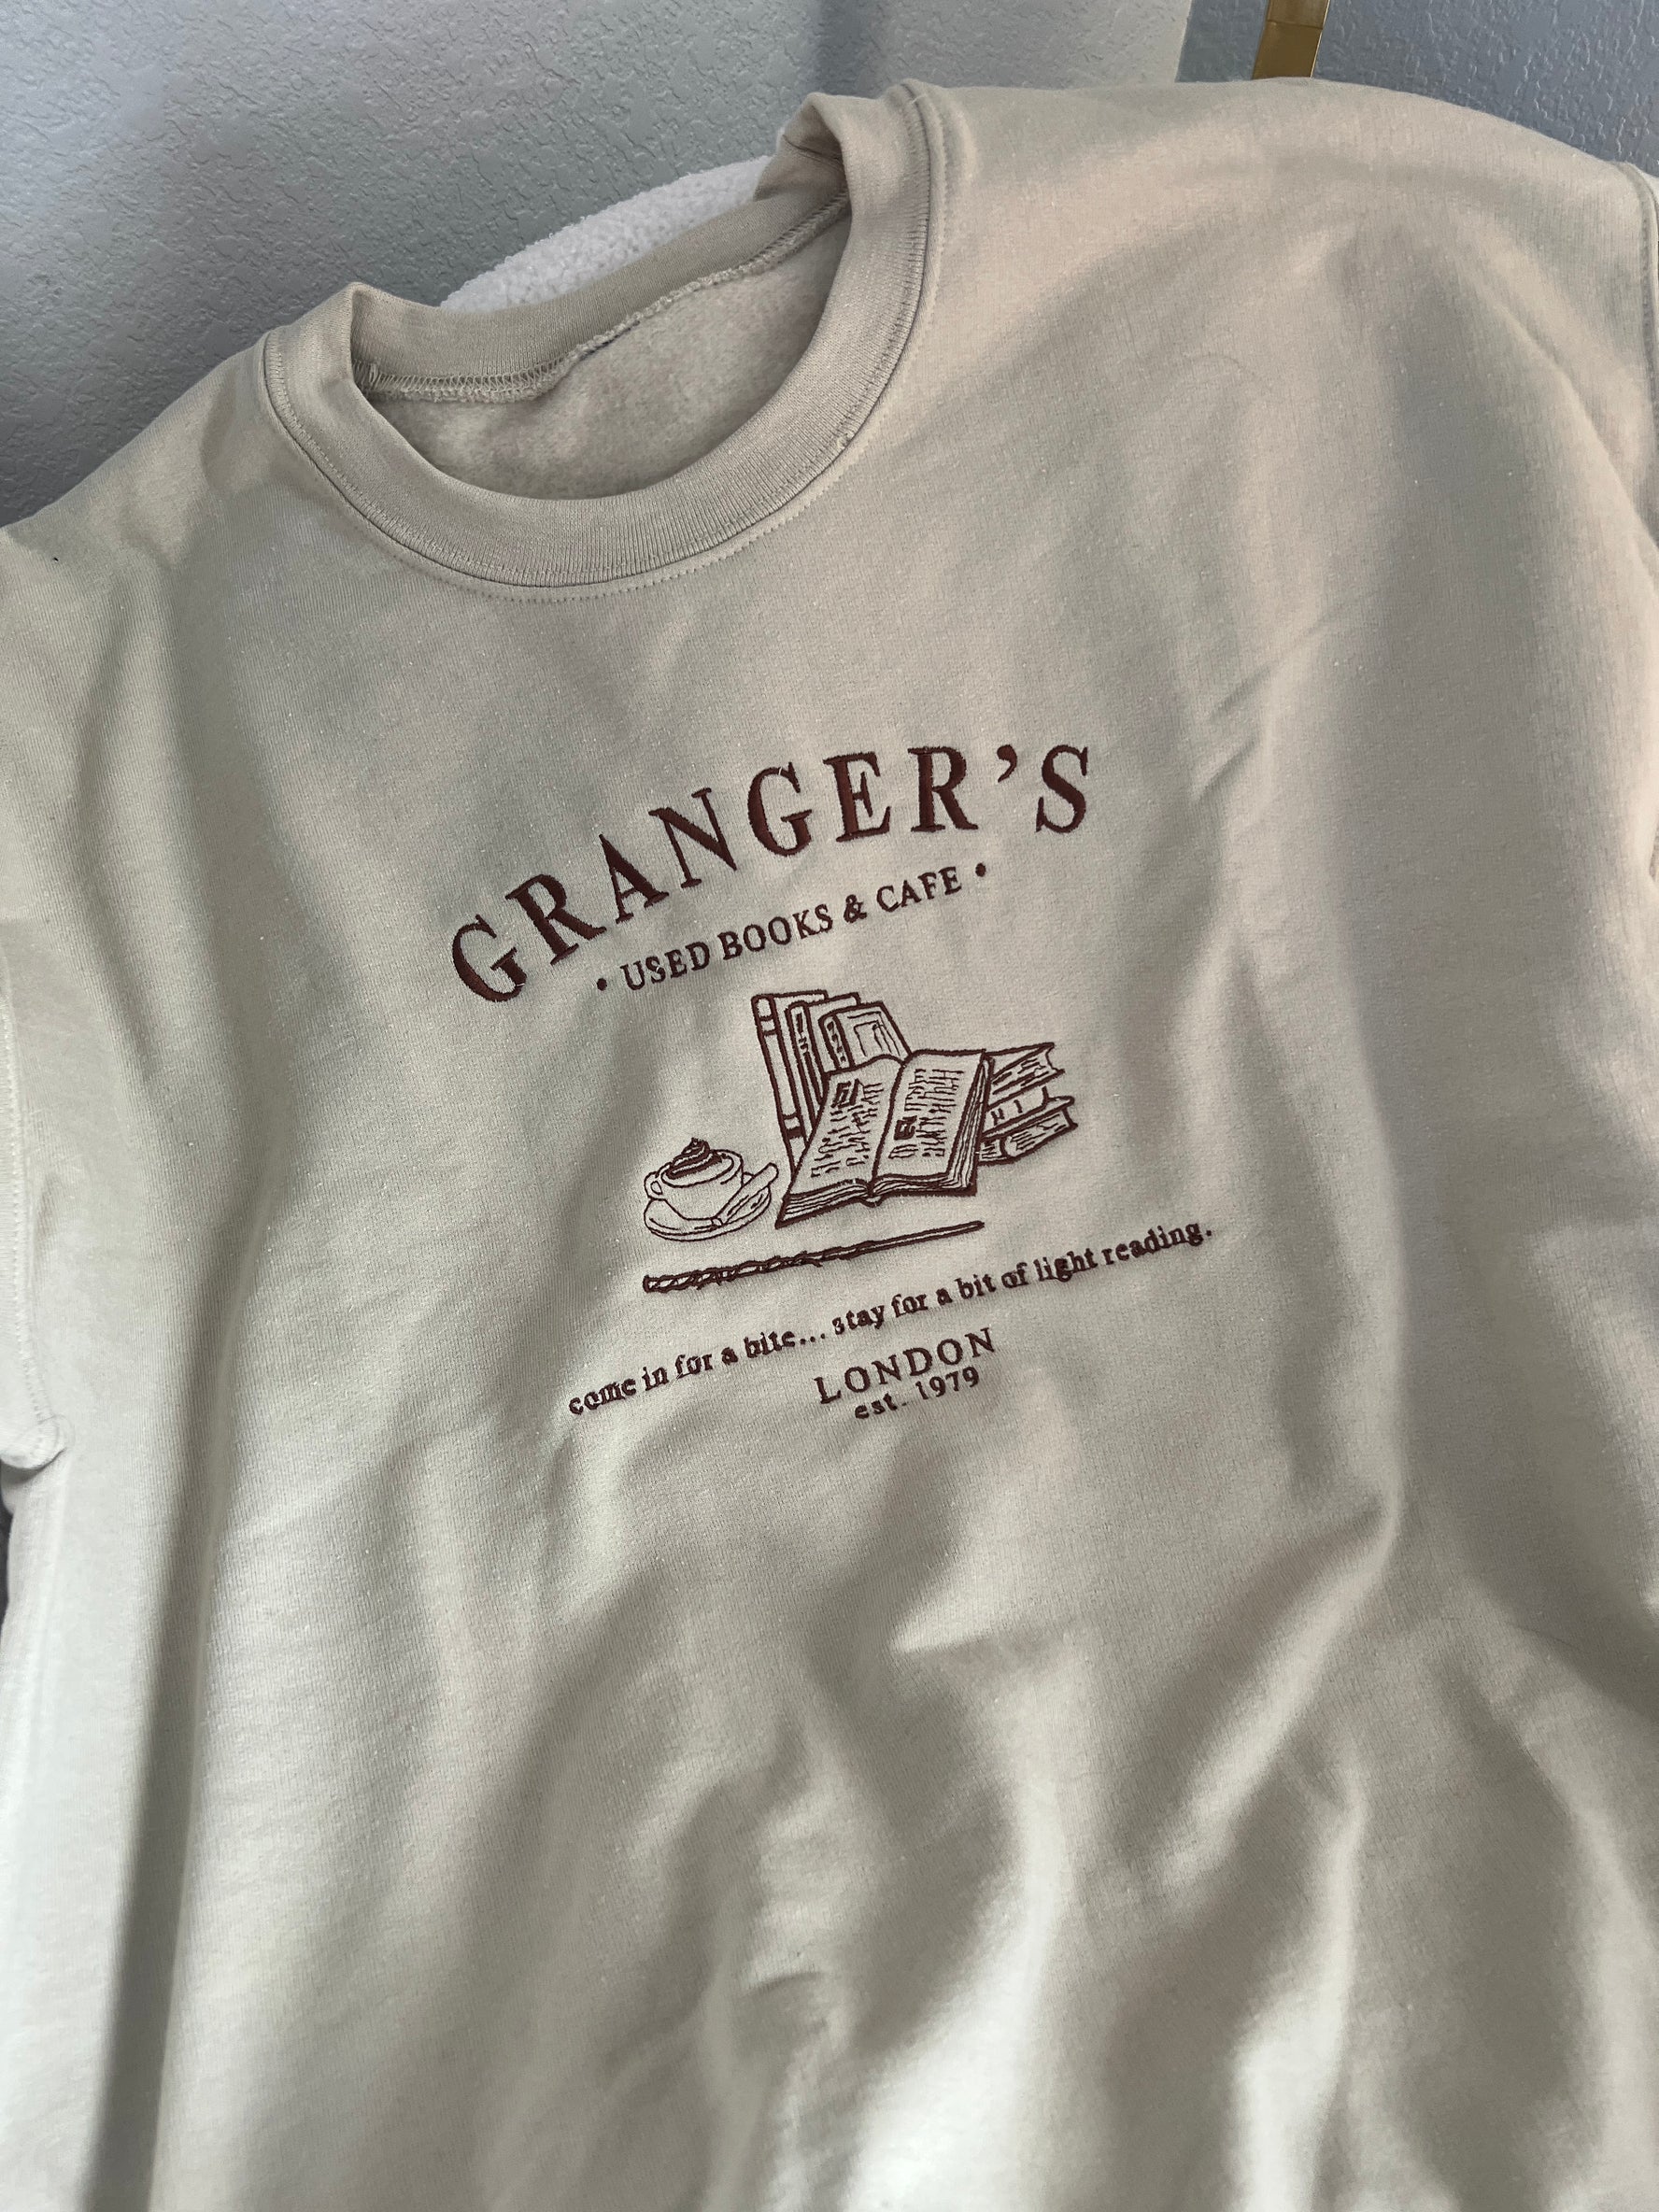 Used Books and Cafe Embroidered Crewneck